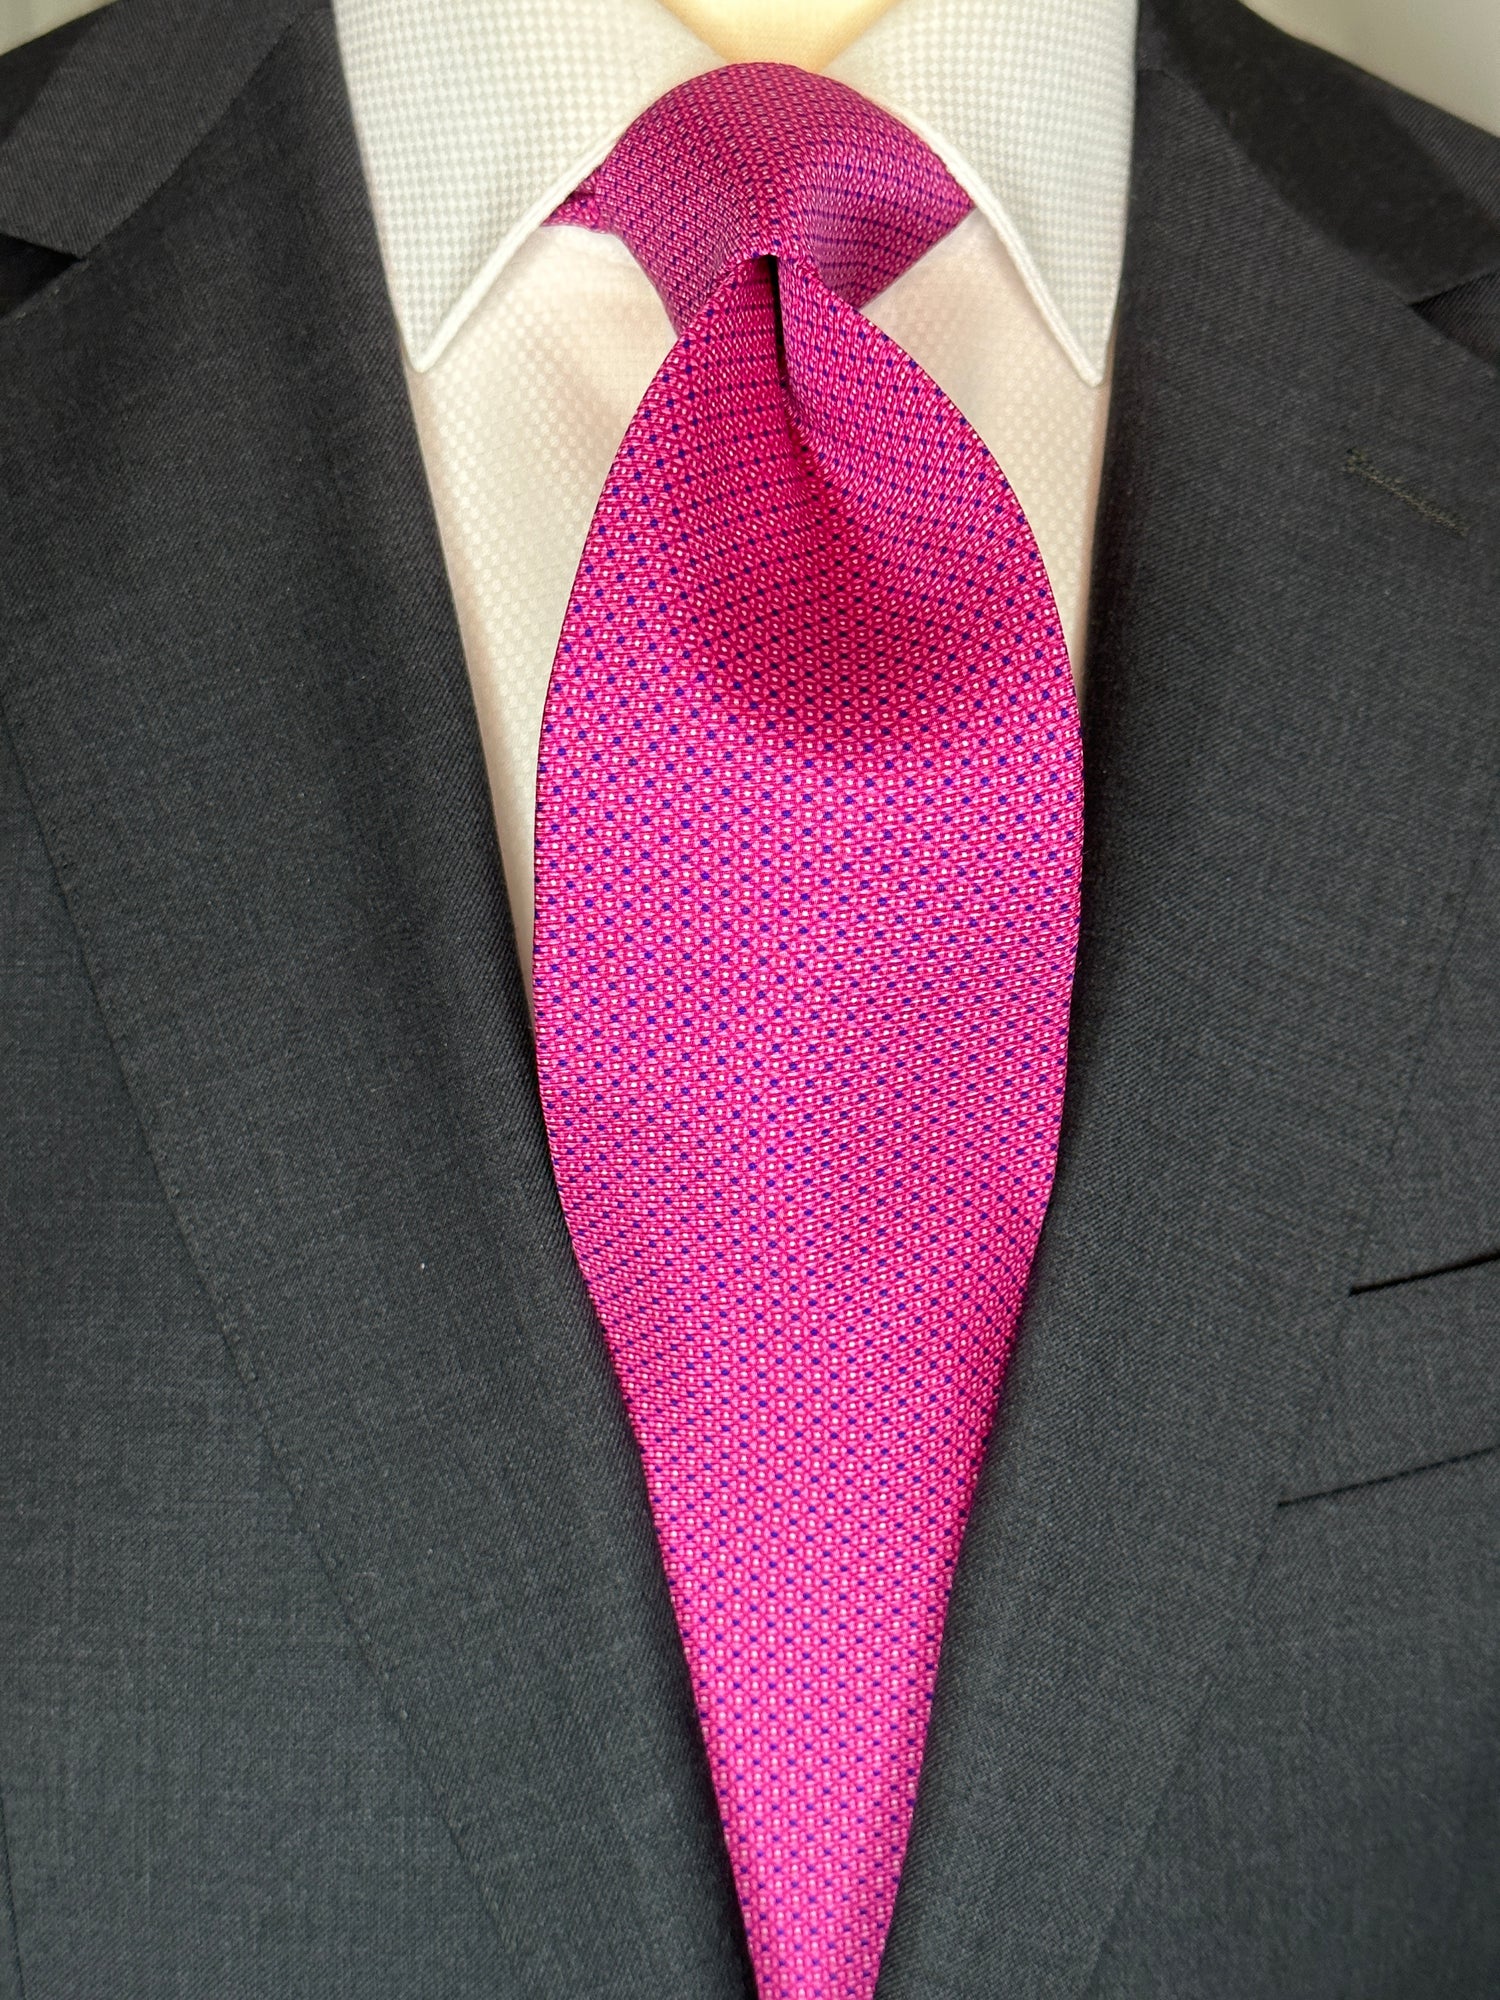 100% silk twill is a luxurious and rich silk. Smooth to the touch with a lightweight soft feel, this tie makes a striking statement in bright pink. It does, however, become toned down due to its very neat and small mini dot geometric pattern. Great for everyday business or law this tie goes out day and night.